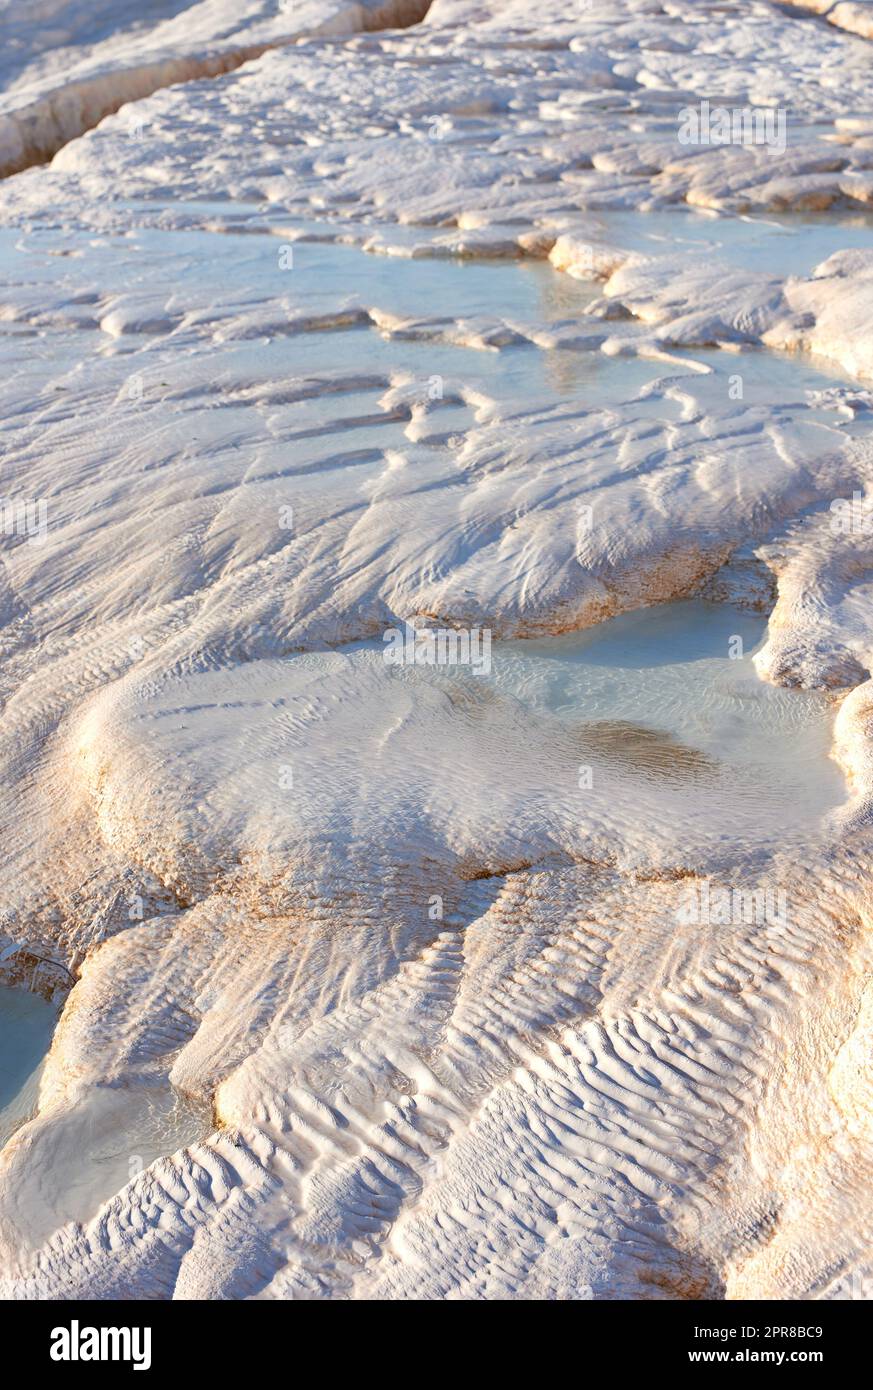 Closeup of travertine pools and terraces in Pamukkale, Turkey. Travelling abroad, overseas for holiday, vacation, tourism. Cotton castle area with carbonate mineral after flowing thermal spring water Stock Photo